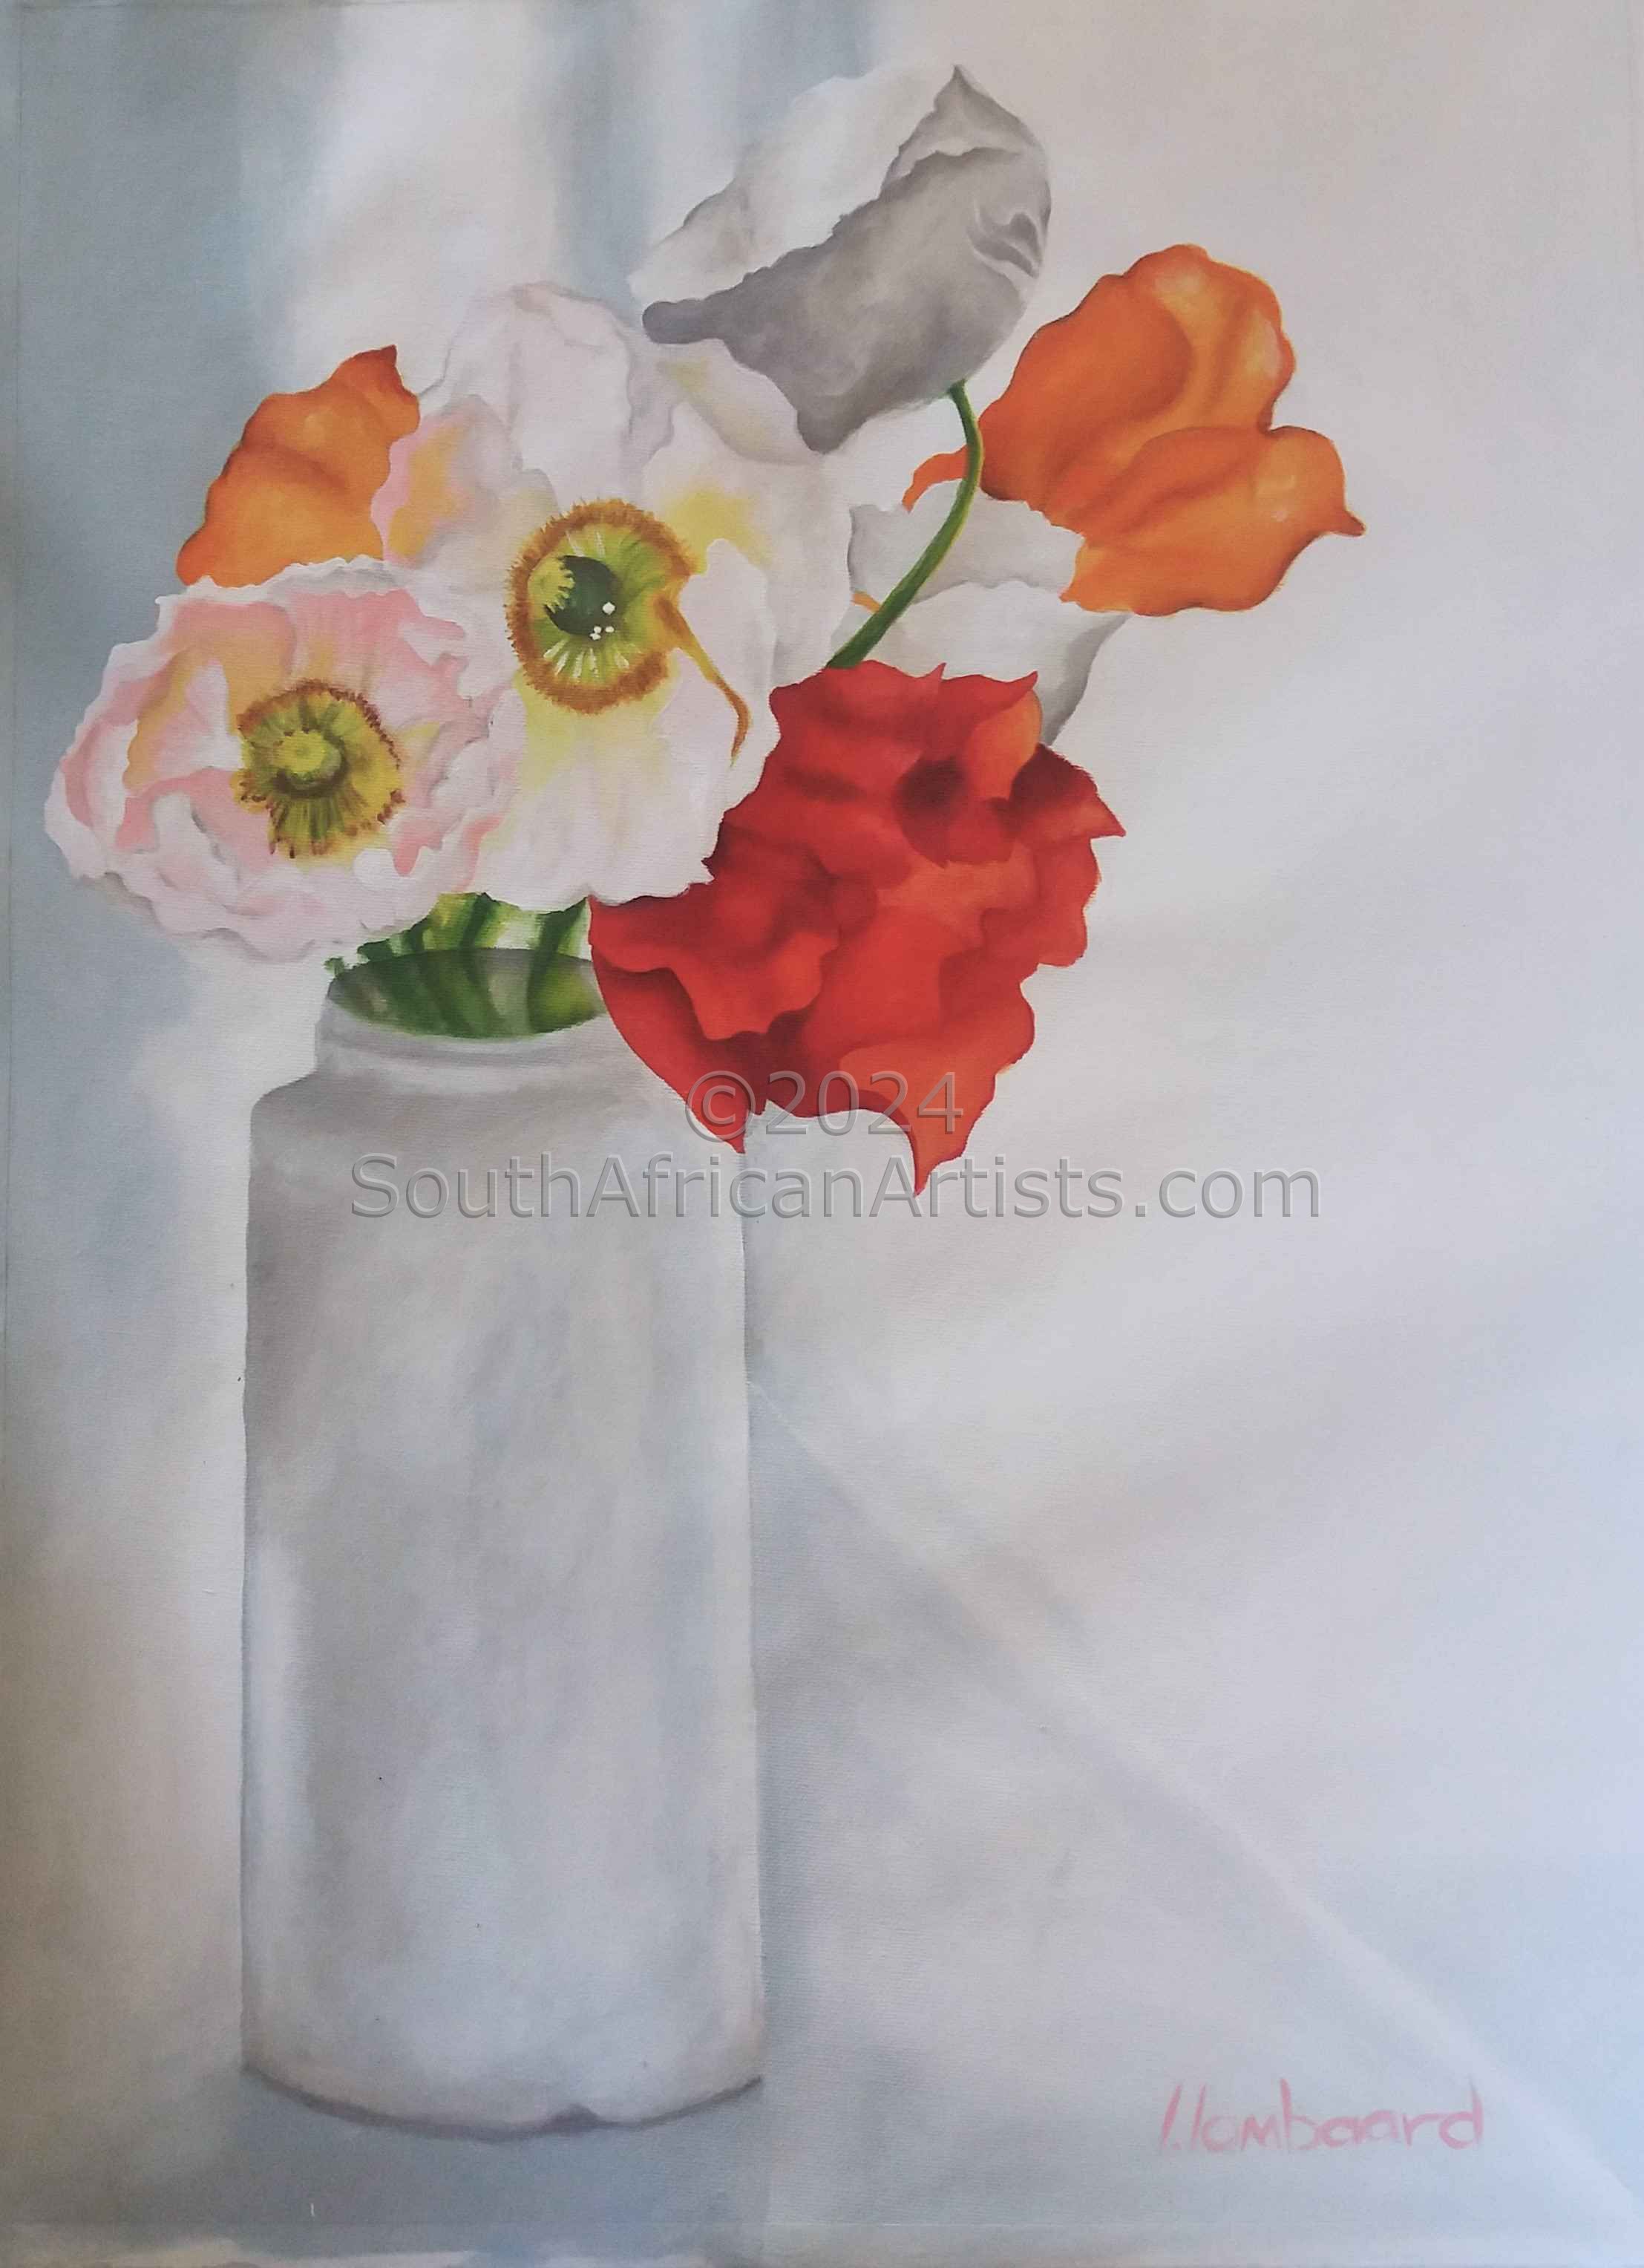 Poppies in the White Vase